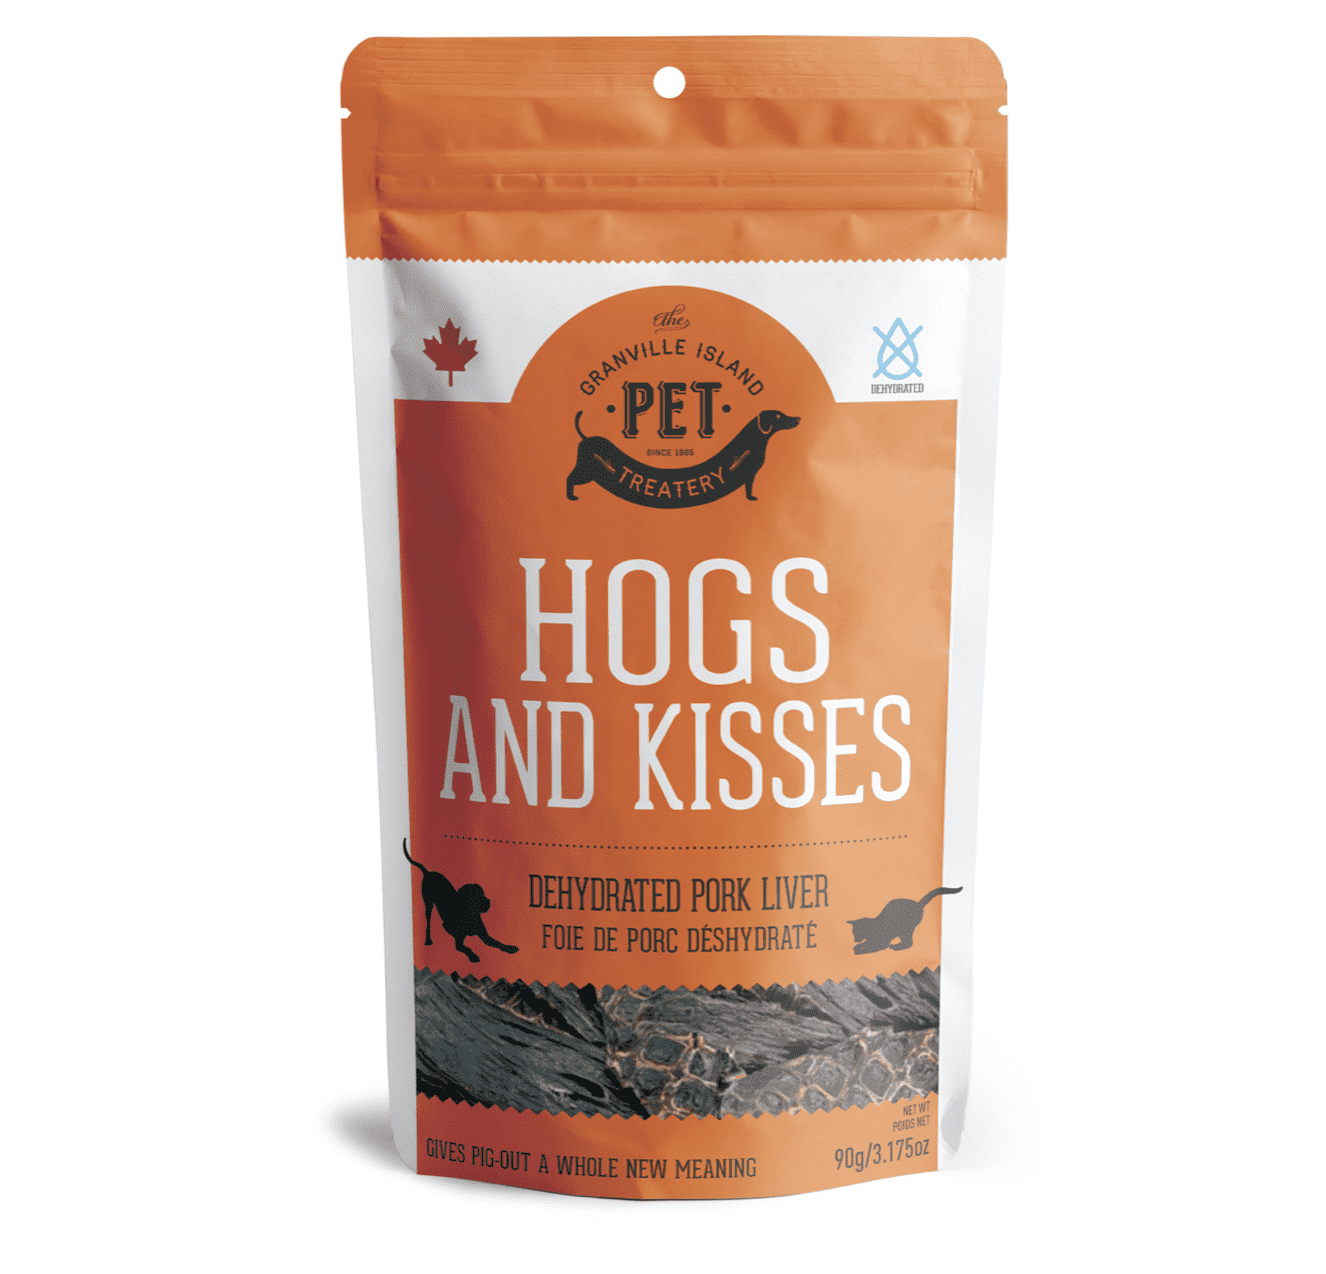 Hogs and Kisses Dehydrated Pork Liver Dog Treats.